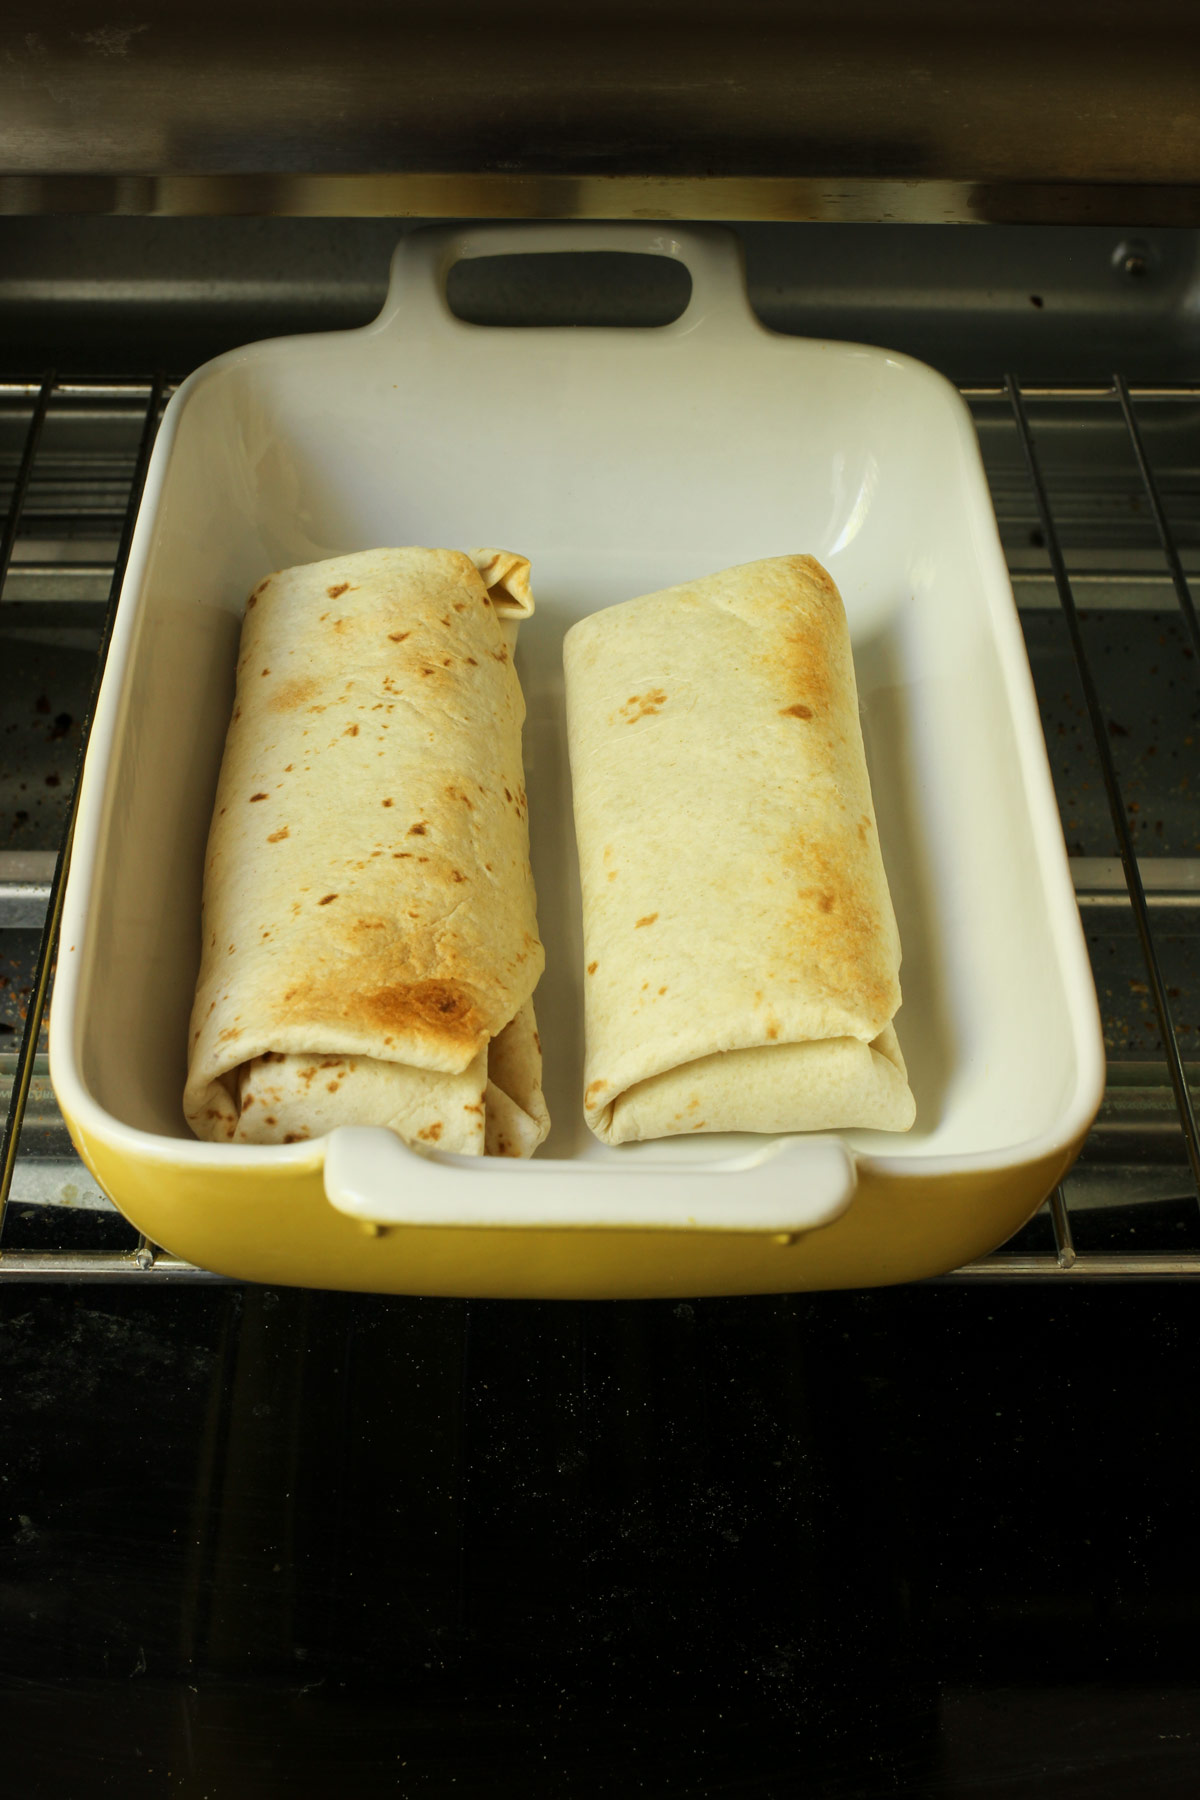 two beef chimichangas baked in a yellow baking dish in the oven.